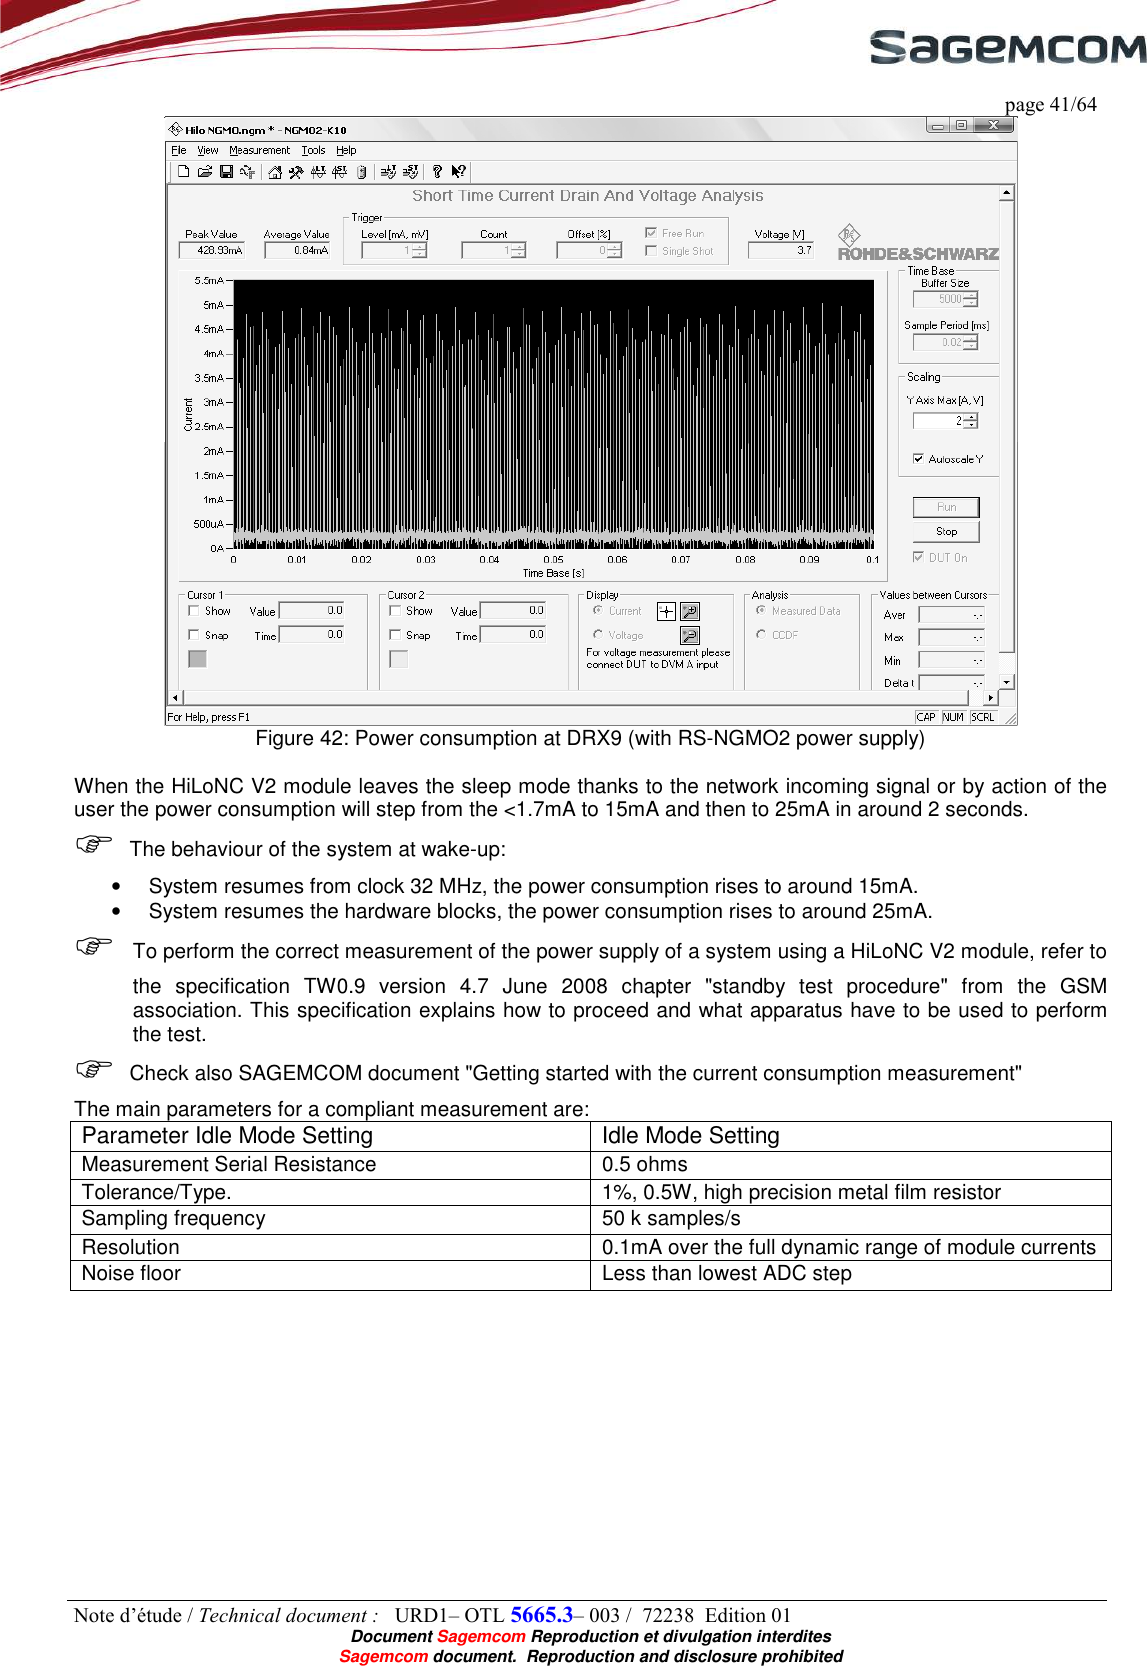     page 41/64 Note d’étude / Technical document :   URD1– OTL 5665.3– 003 /  72238  Edition 01  Document Sagemcom Reproduction et divulgation interdites Sagemcom document.  Reproduction and disclosure prohibited  Figure 42: Power consumption at DRX9 (with RS-NGMO2 power supply)  When the HiLoNC V2 module leaves the sleep mode thanks to the network incoming signal or by action of the user the power consumption will step from the &lt;1.7mA to 15mA and then to 25mA in around 2 seconds.  The behaviour of the system at wake-up: •  System resumes from clock 32 MHz, the power consumption rises to around 15mA. •  System resumes the hardware blocks, the power consumption rises to around 25mA.  To perform the correct measurement of the power supply of a system using a HiLoNC V2 module, refer to the  specification  TW0.9  version  4.7  June  2008  chapter  &quot;standby  test  procedure&quot;  from  the  GSM association. This specification explains how to proceed and what apparatus have to be used to perform the test.  Check also SAGEMCOM document &quot;Getting started with the current consumption measurement&quot; The main parameters for a compliant measurement are: Parameter Idle Mode Setting  Idle Mode Setting Measurement Serial Resistance  0.5 ohms Tolerance/Type. 1%, 0.5W, high precision metal film resistor Sampling frequency  50 k samples/s Resolution  0.1mA over the full dynamic range of module currents Noise floor  Less than lowest ADC step 